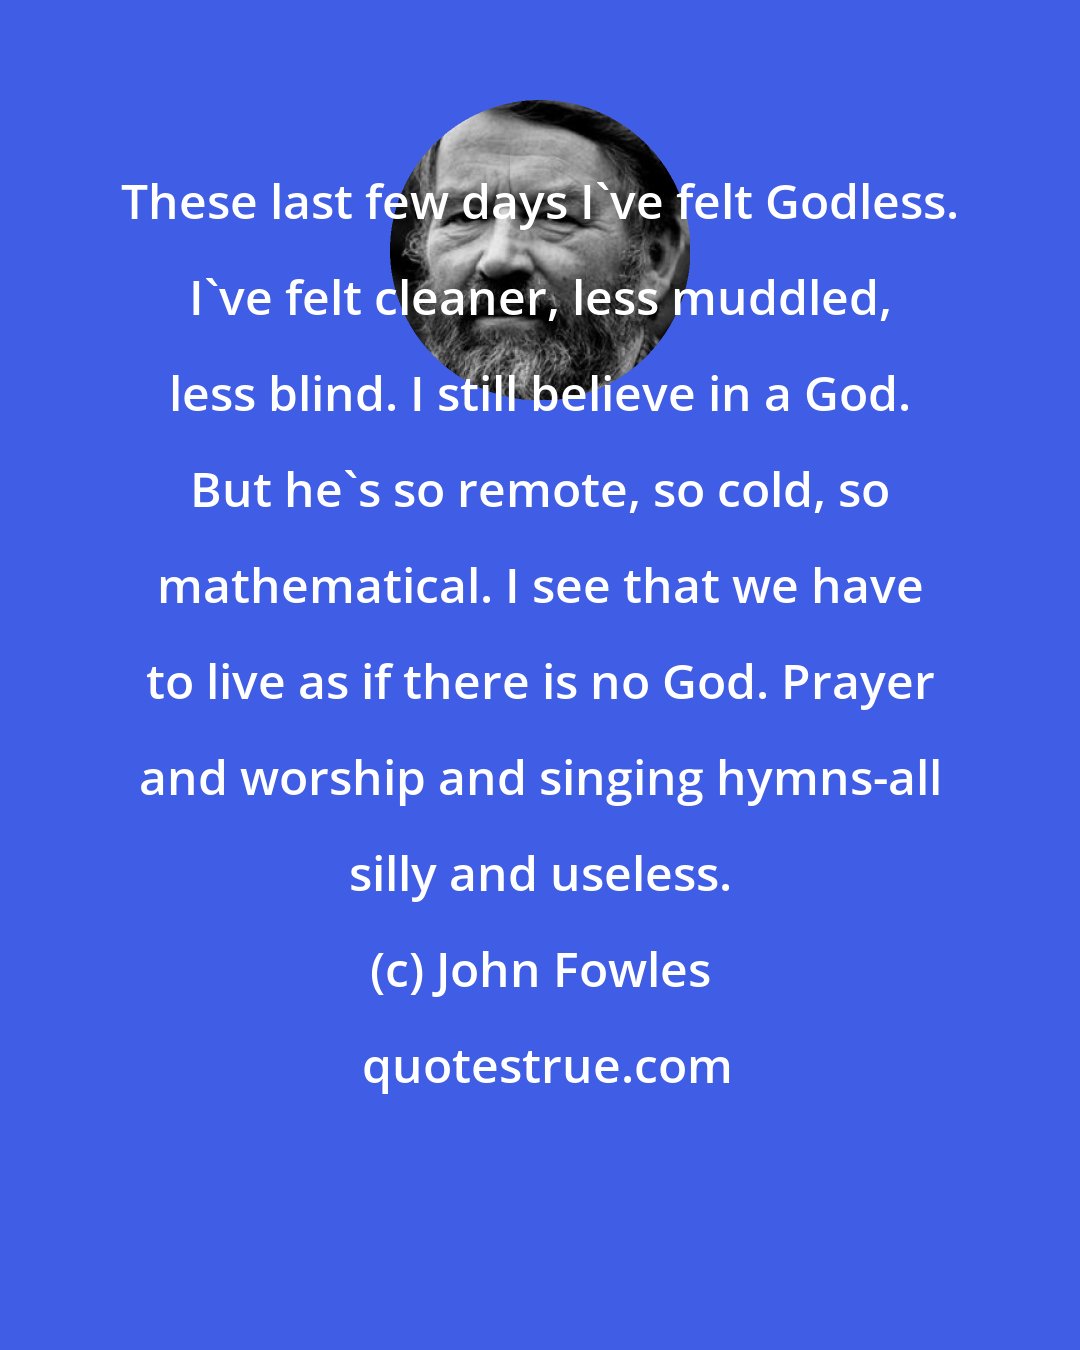 John Fowles: These last few days I've felt Godless. I've felt cleaner, less muddled, less blind. I still believe in a God. But he's so remote, so cold, so mathematical. I see that we have to live as if there is no God. Prayer and worship and singing hymns-all silly and useless.